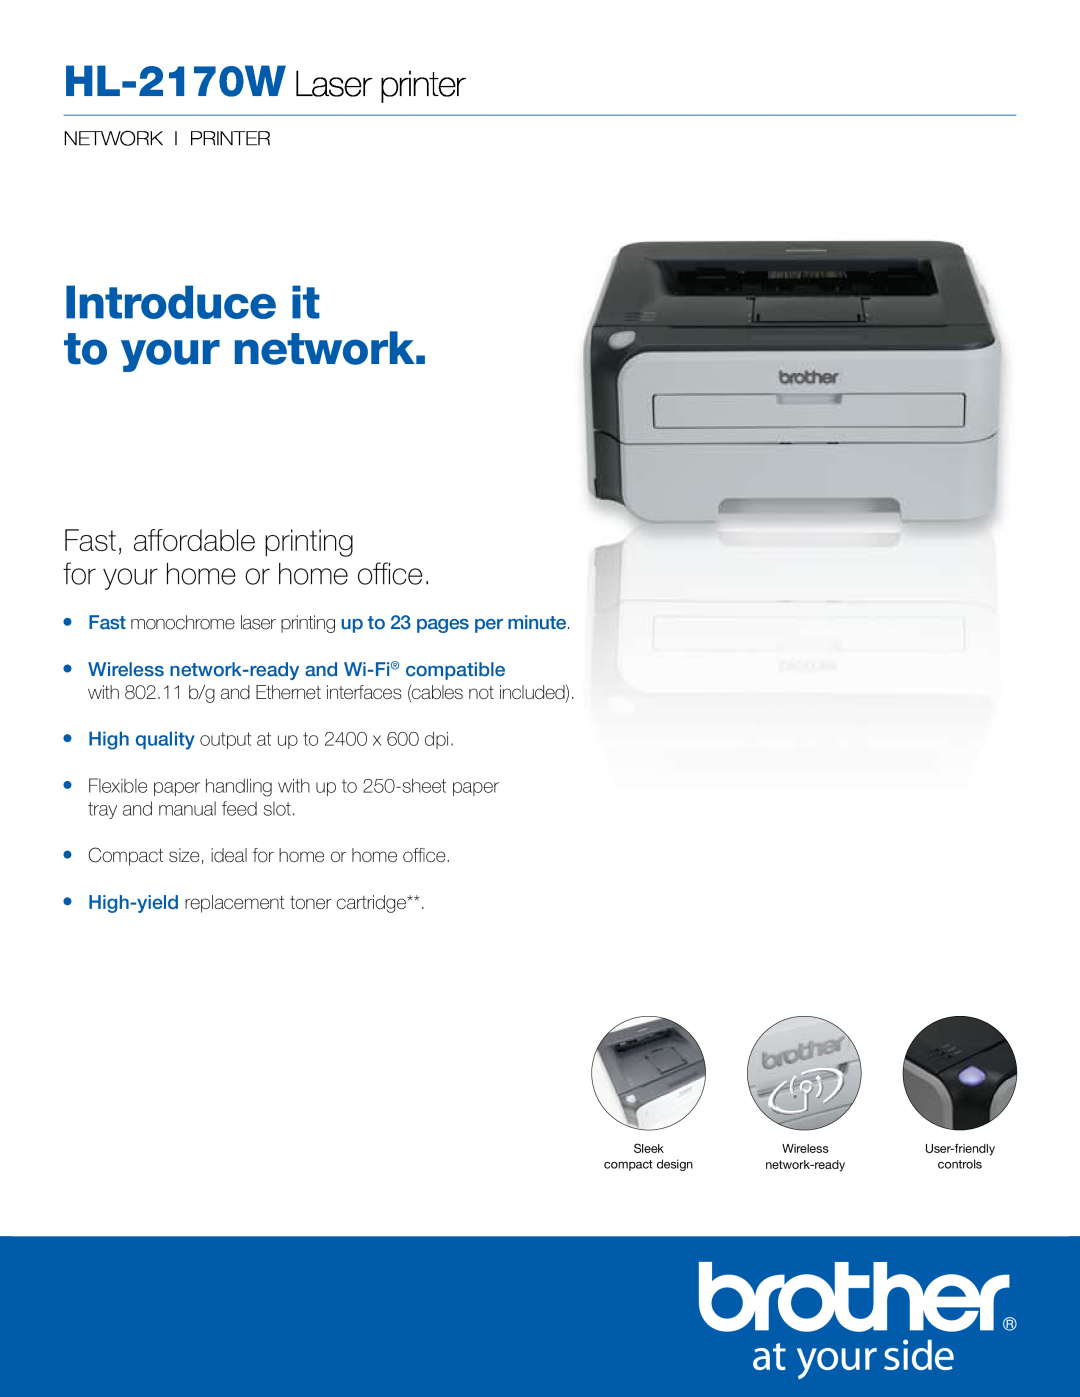 Brother manual HL-2170W Laser printer, Introduce it to your network, Wireless network-ready and Wi-Fi compatible 